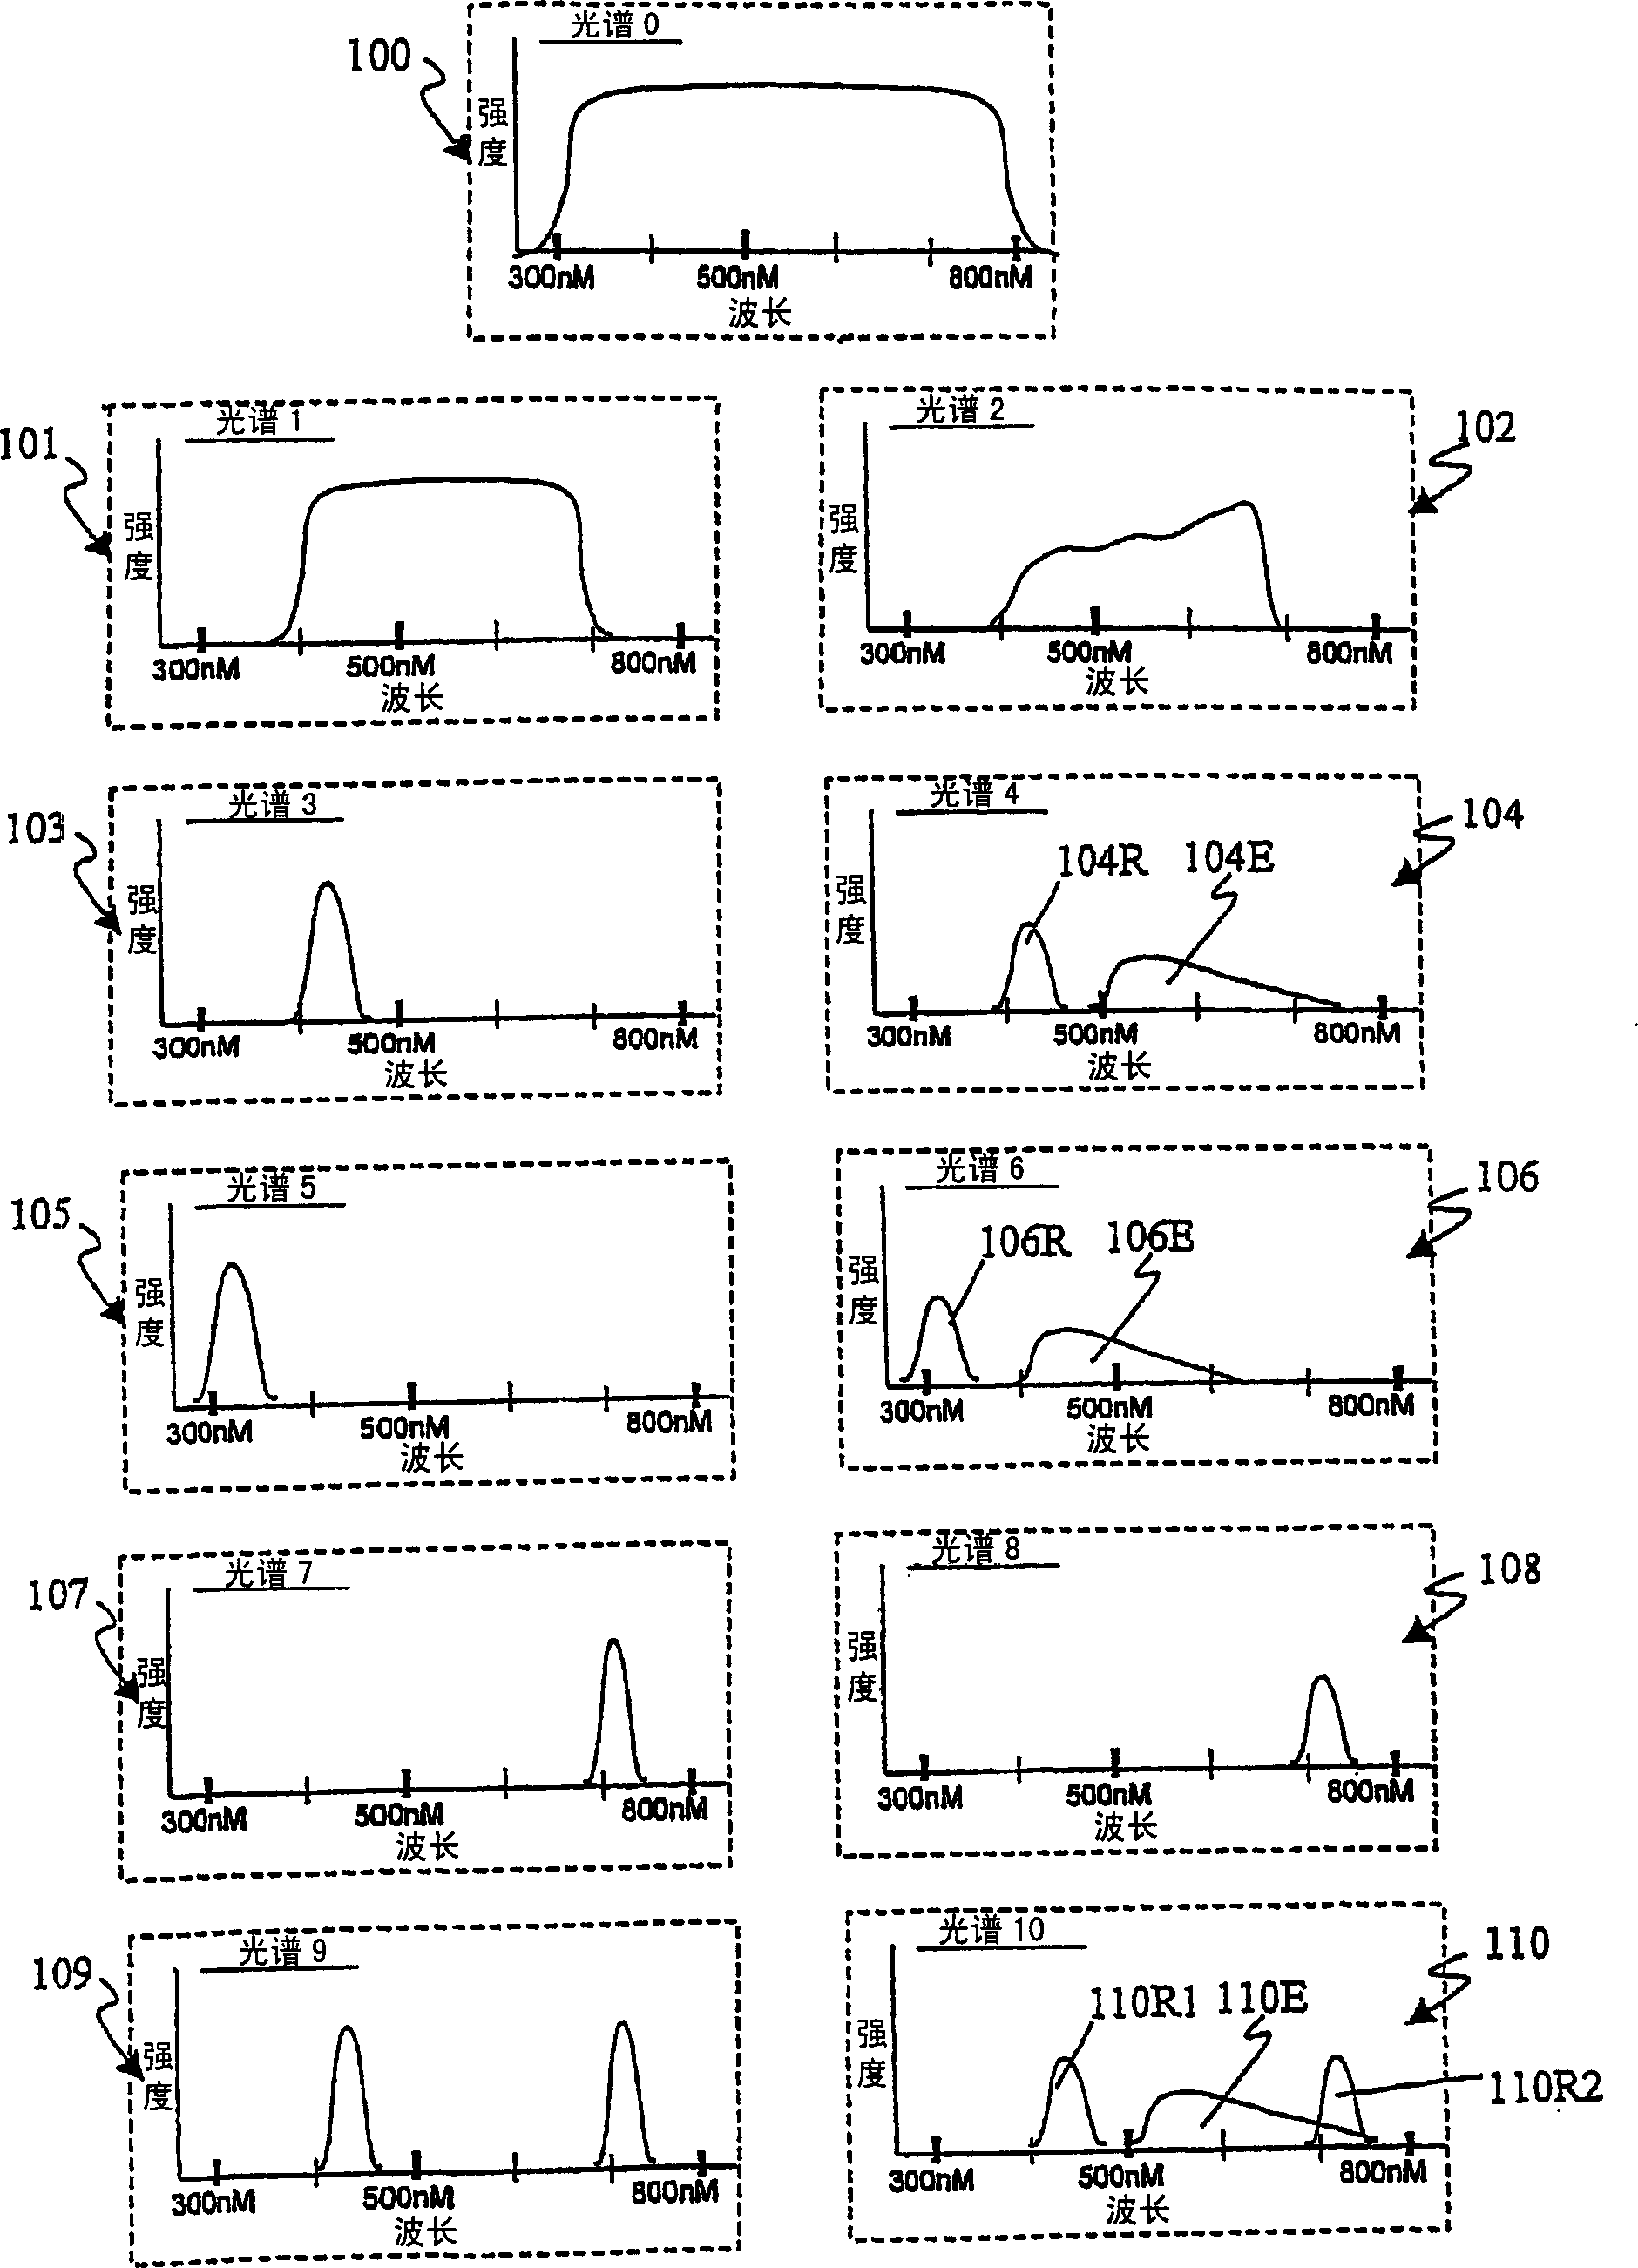 Real-time contemporaneous multimodal imaging and spectroscopy uses thereof